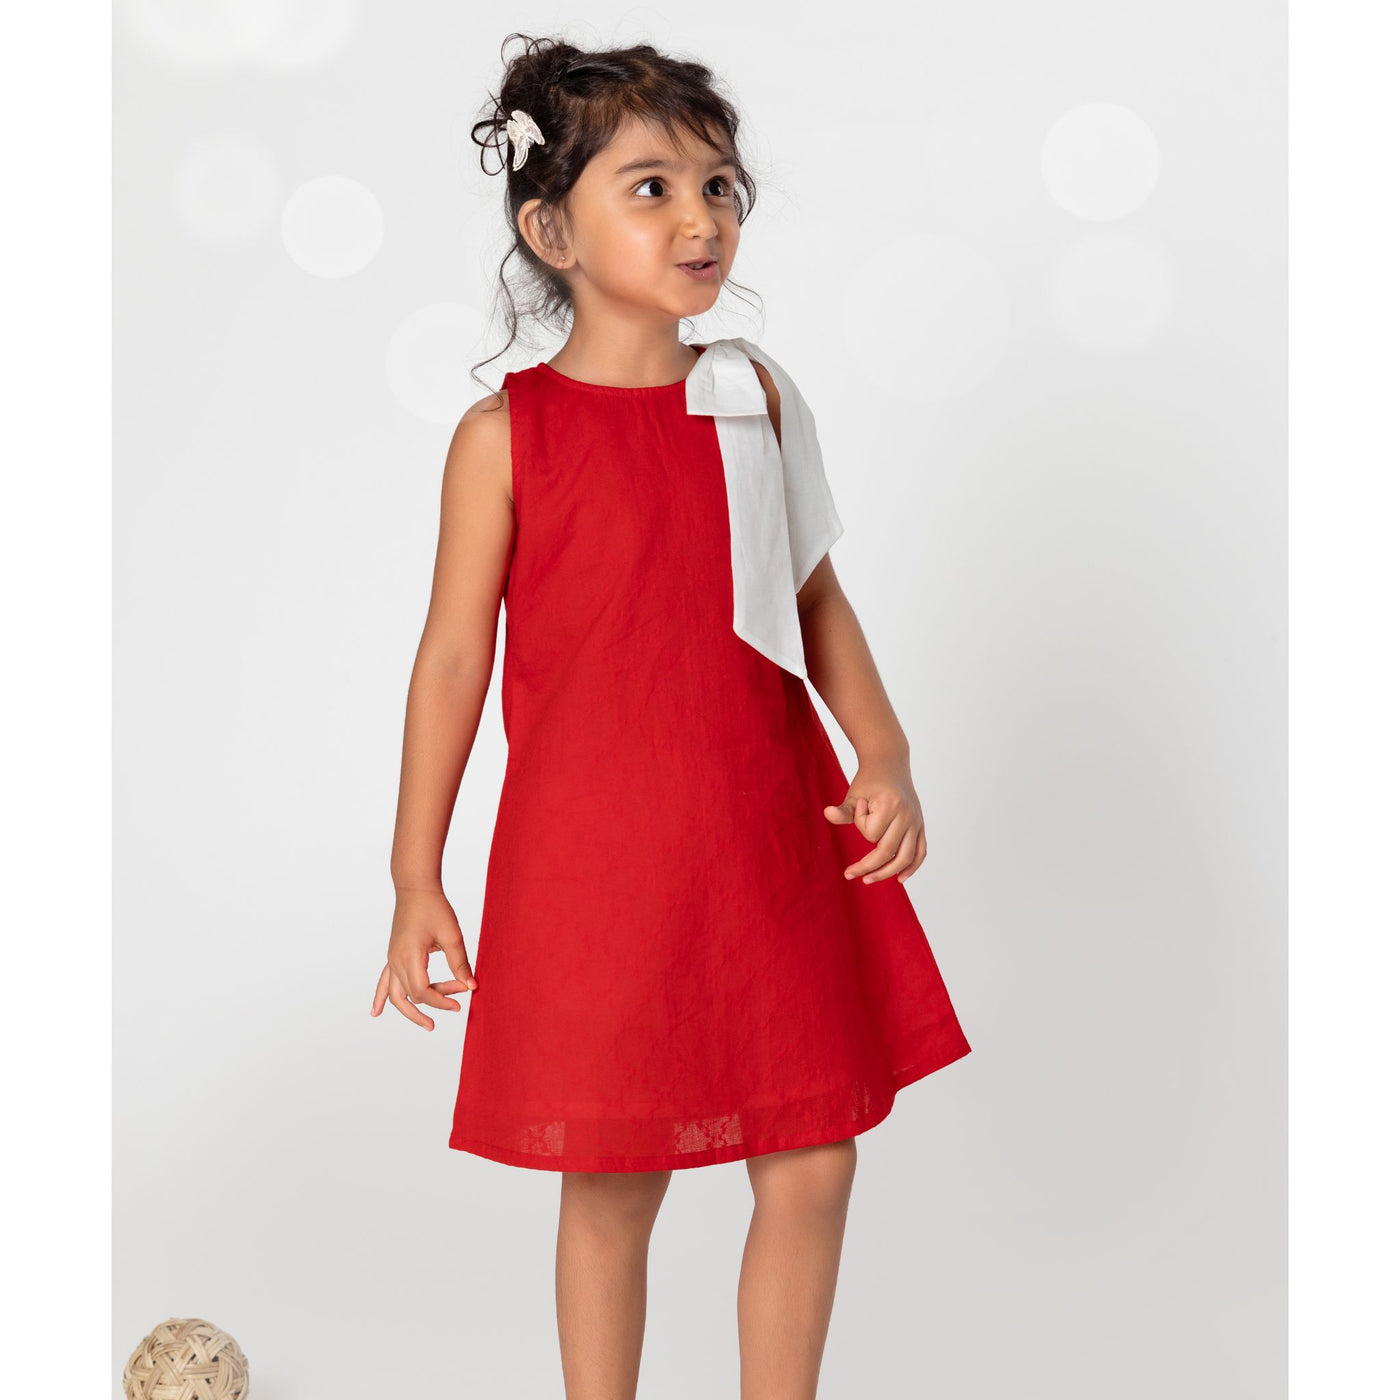 red dress with white bow, stylish cotton dress for girls, cotton lappet